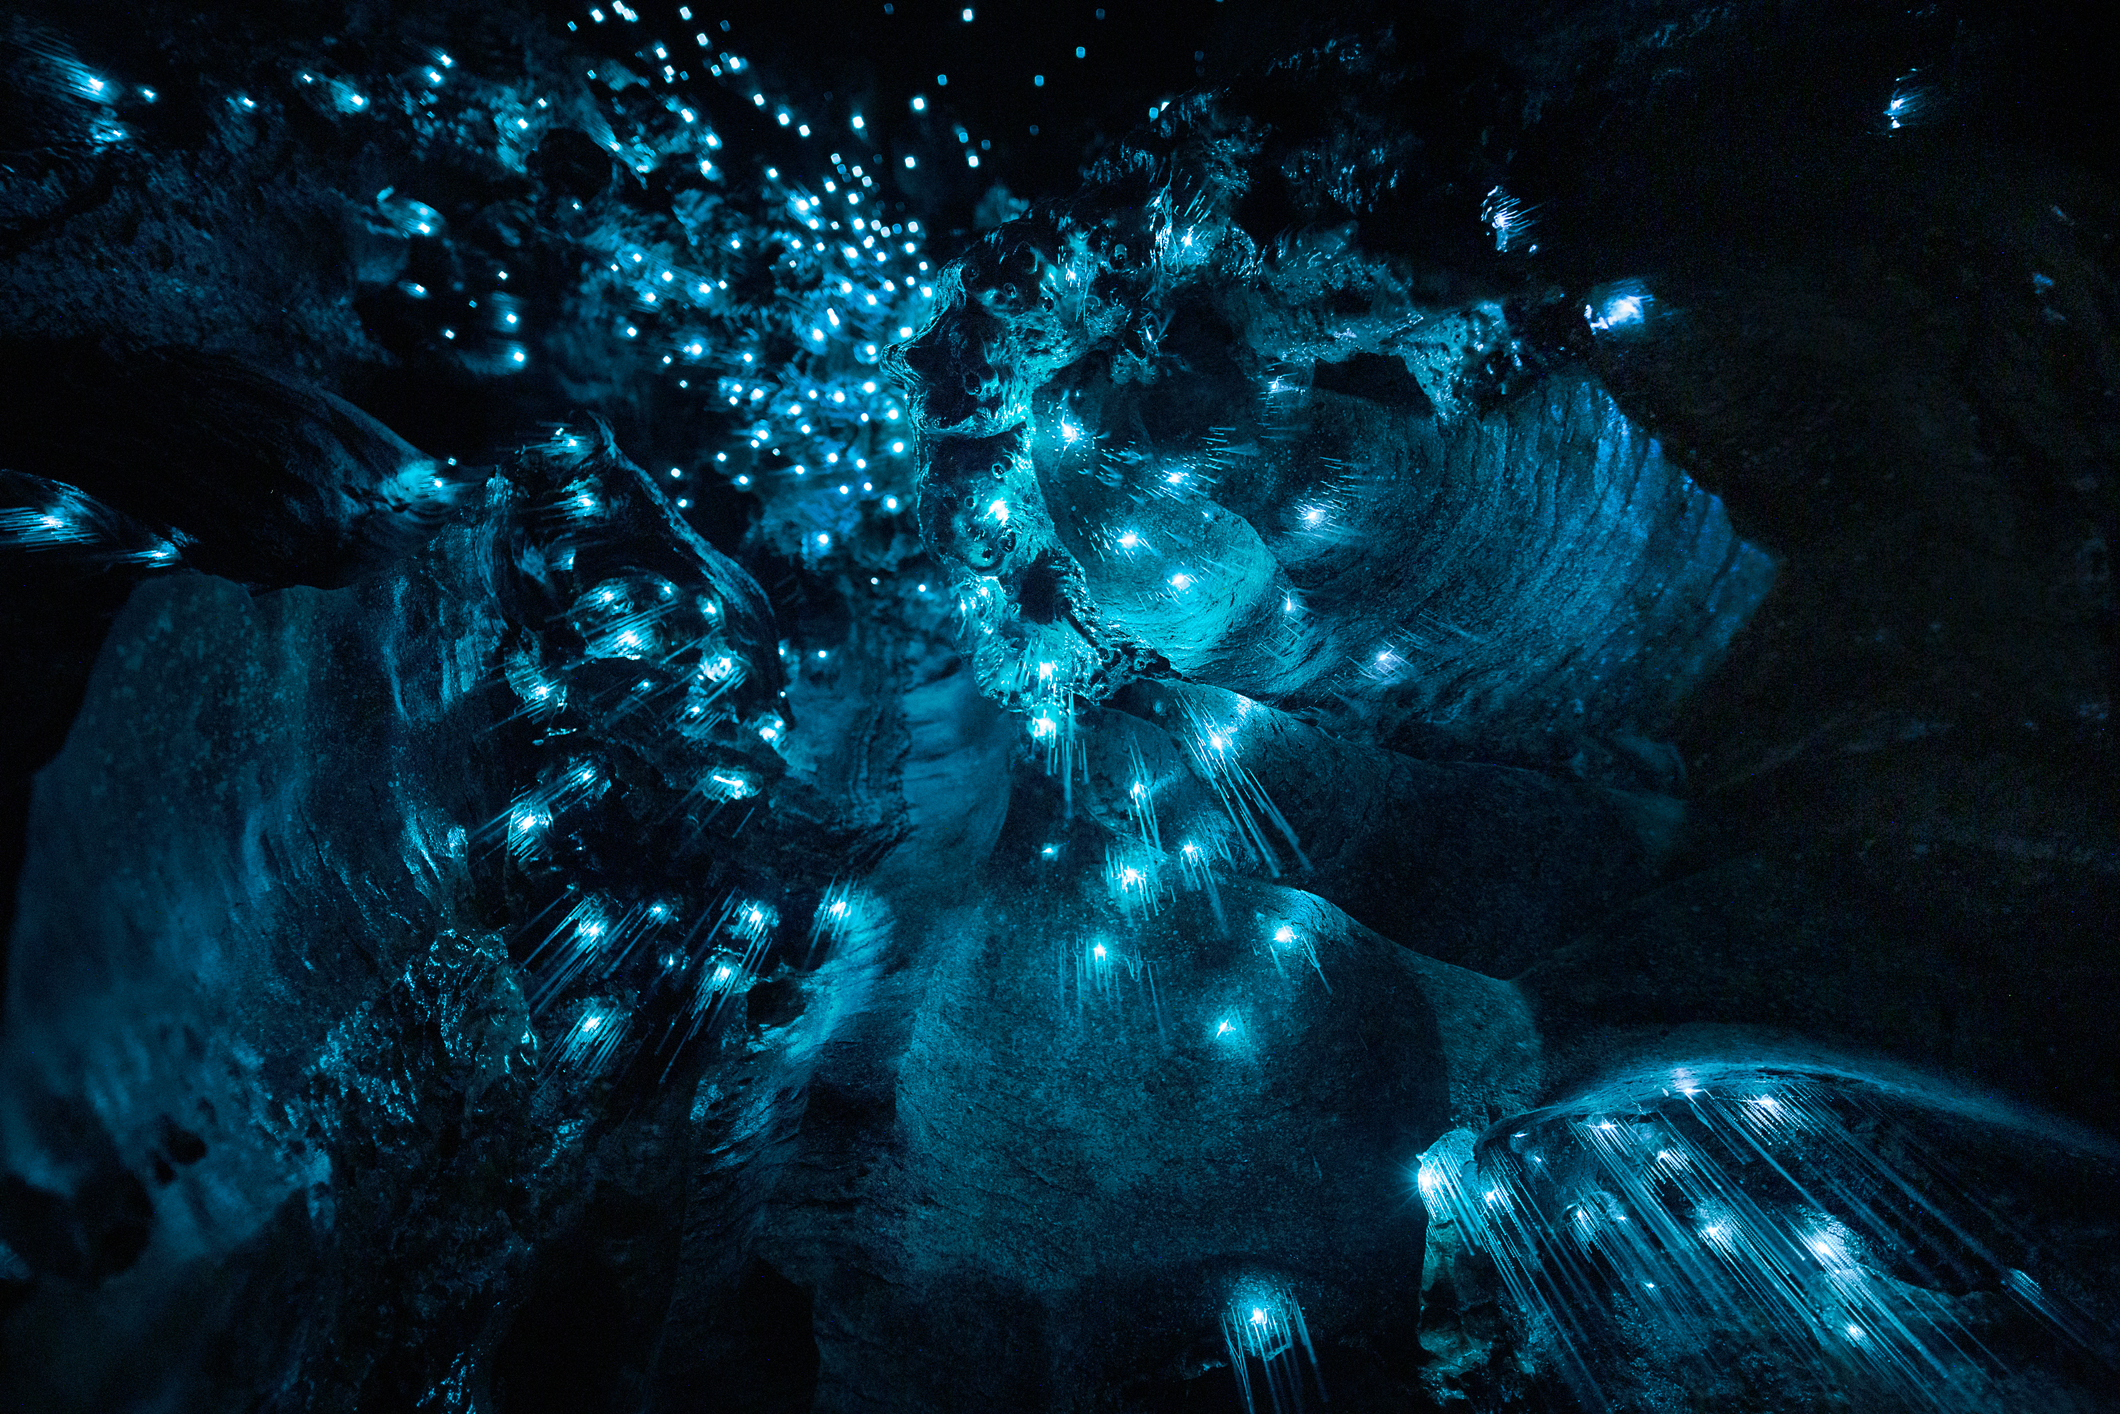 Abstract Art of Nature – Close Up of New Zealand Glow Worms in Cave